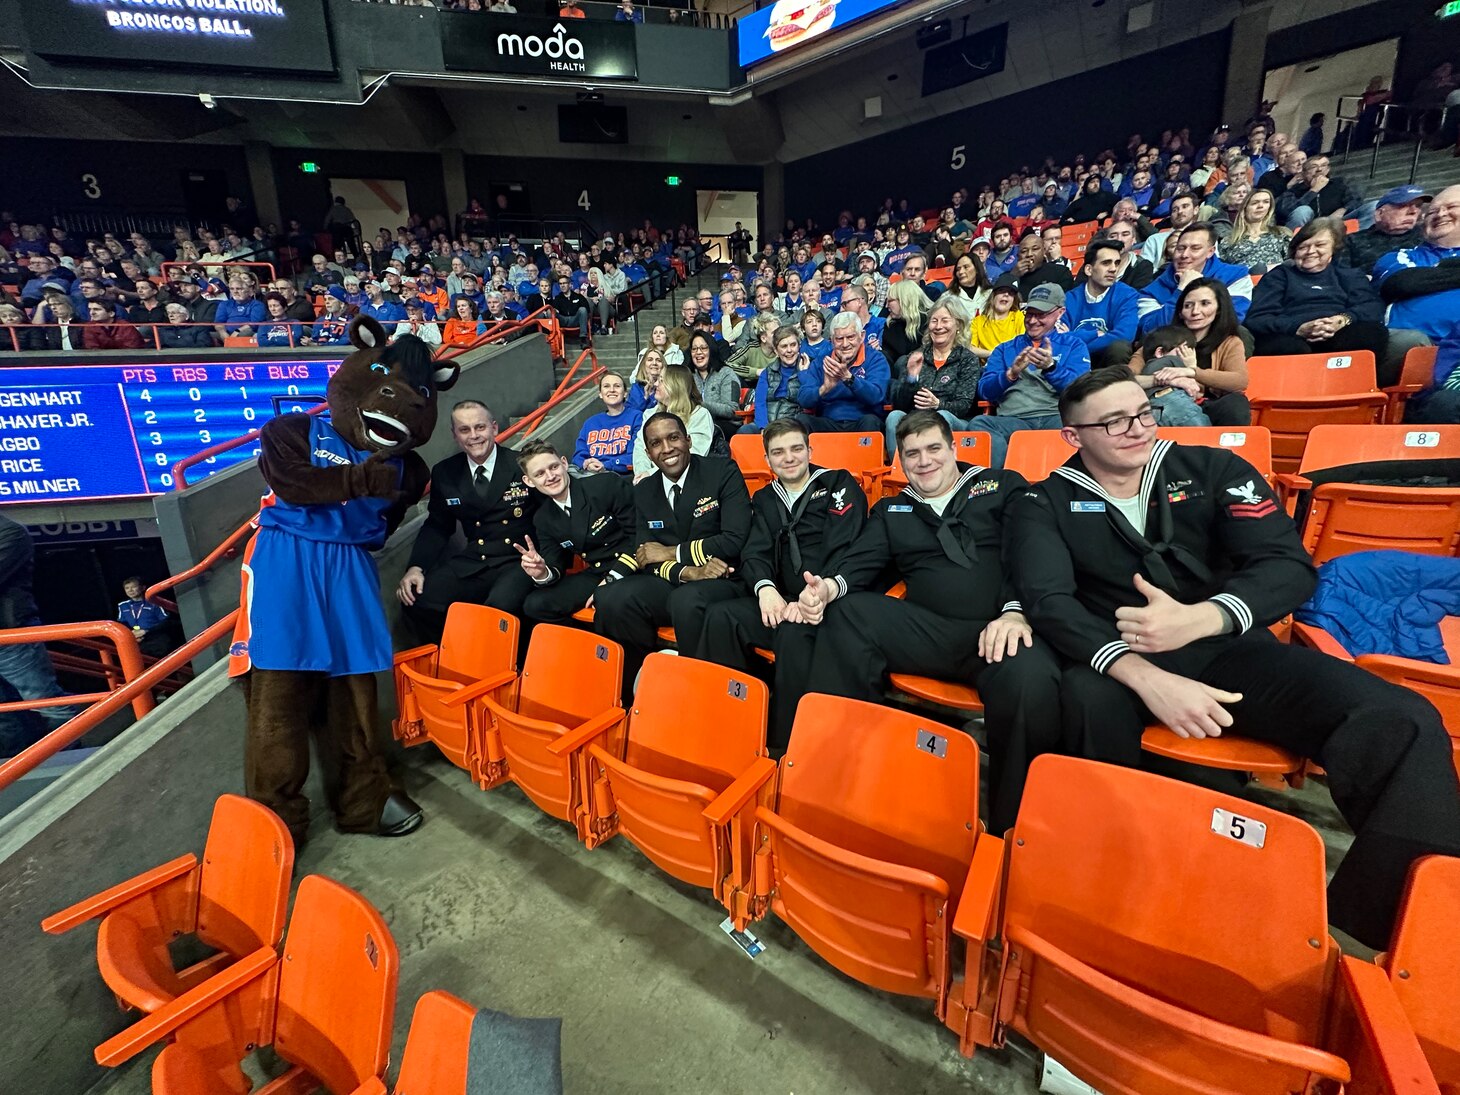 Crewmembers from the future USS Idaho (SSN 799) pose for a photo with Boise State University mascot Buster Bronco during a basketball game in Boise, Idaho, Jan. 24.